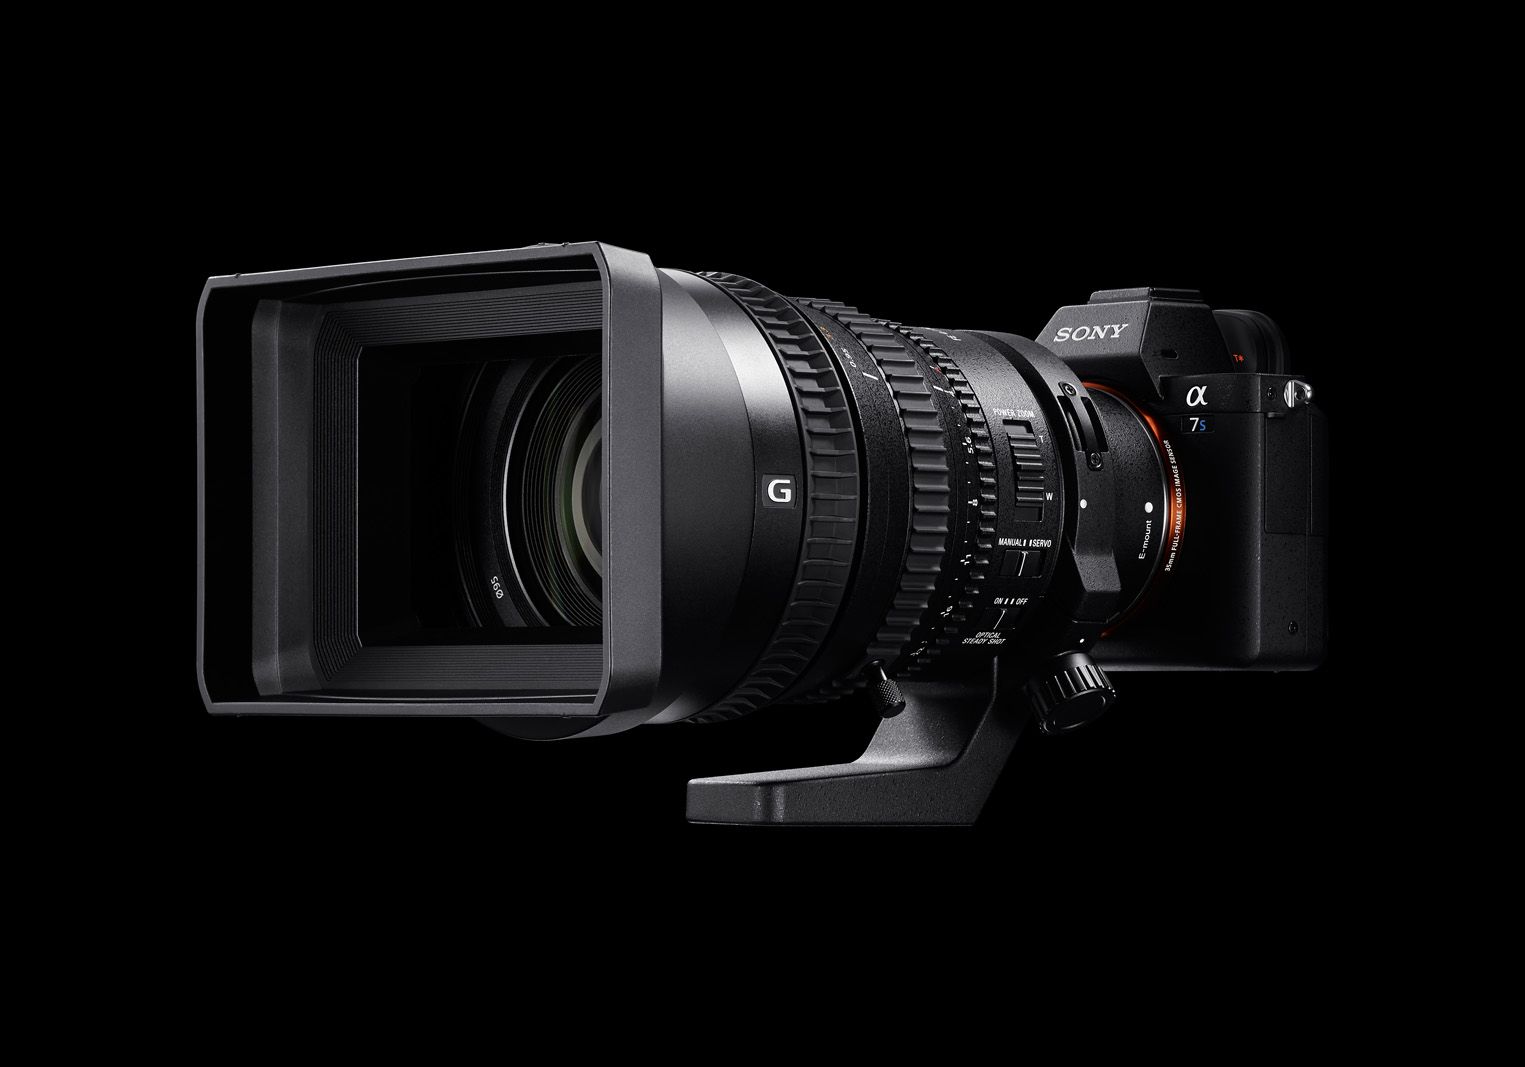 sony a7s ii can record 4k video in ridiculously low levels of light iso up to 409 600 image 1